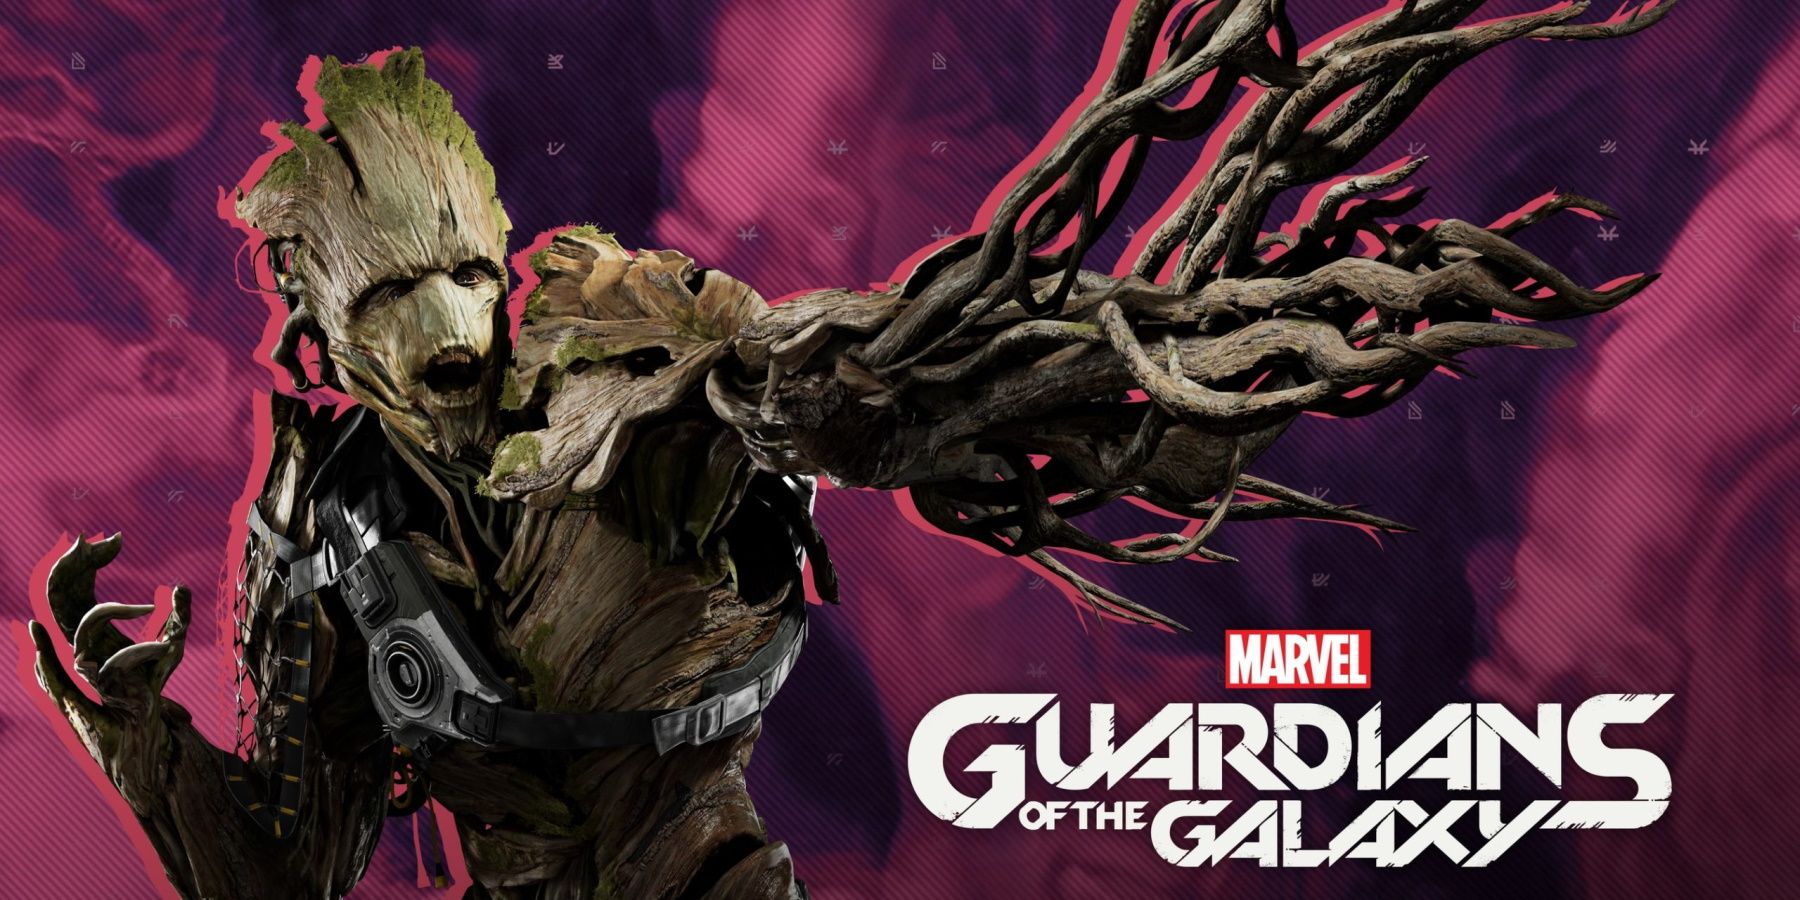 Marvel's Guardians of the Galaxy groot attacking promotional art